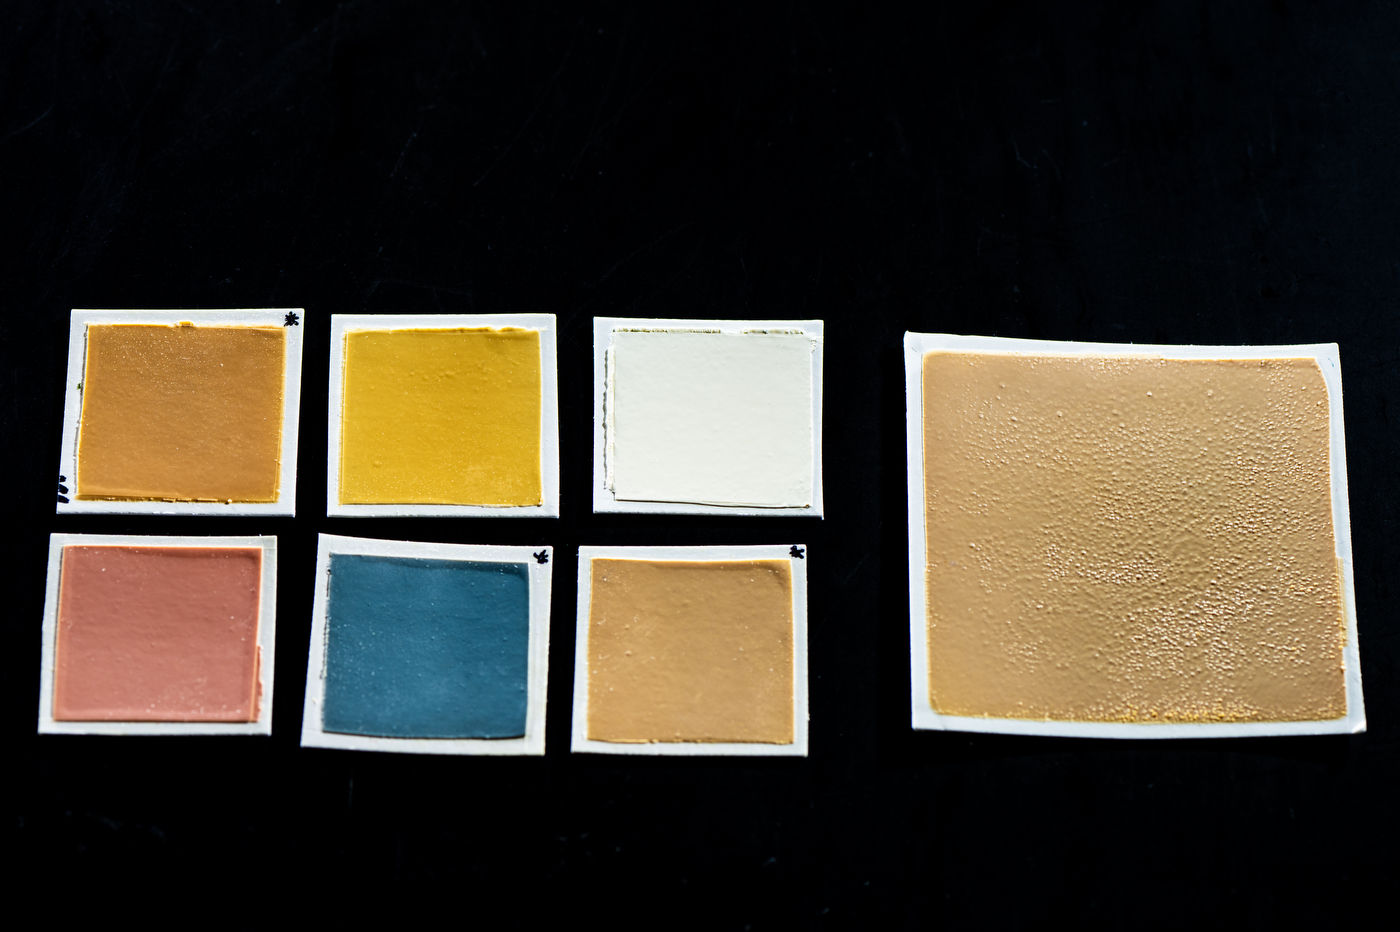 Samples of paint in different colors.